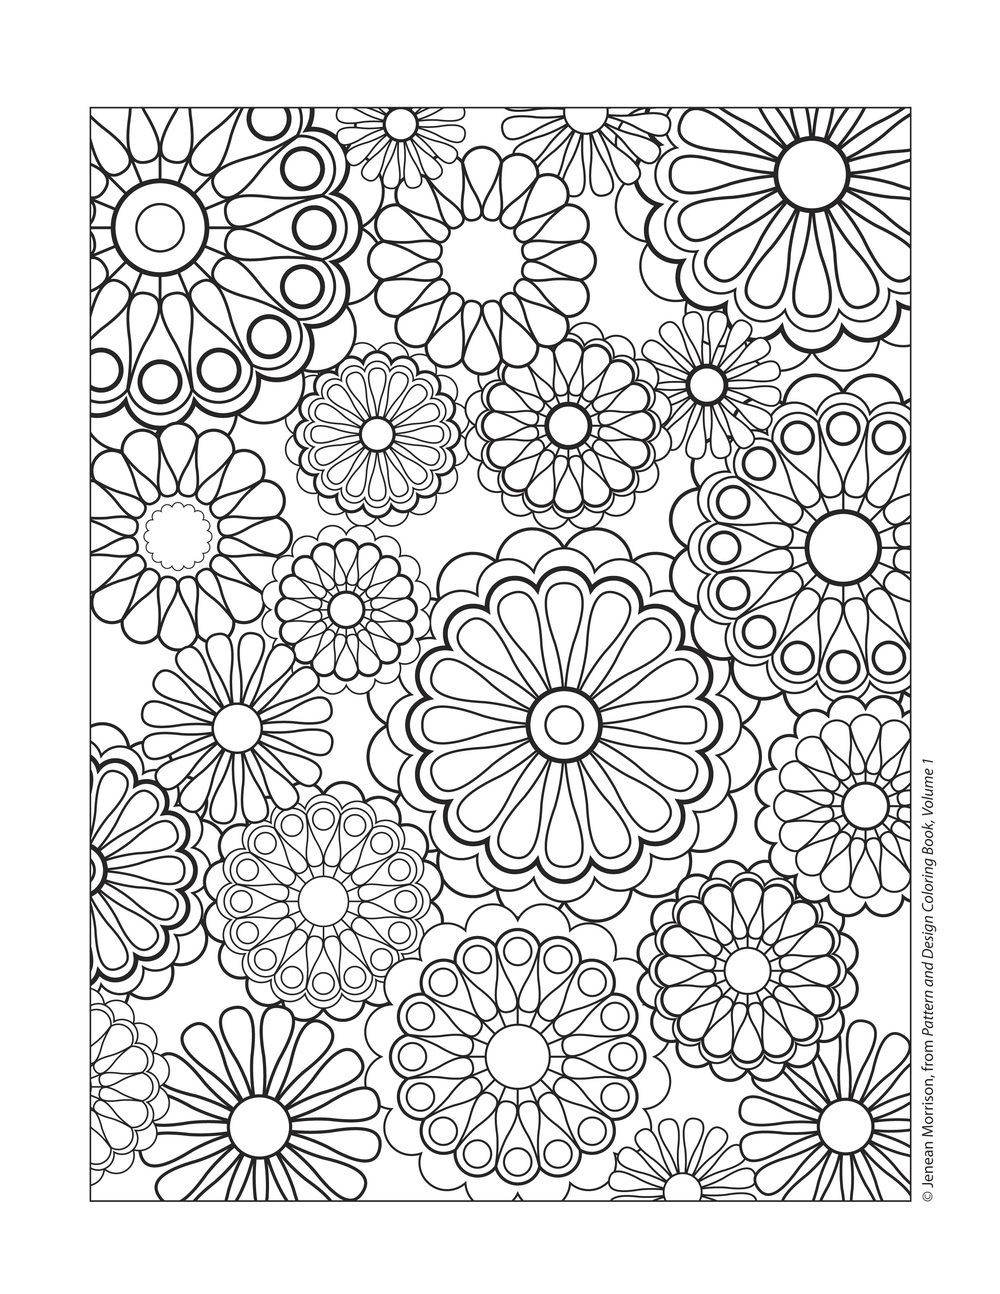 27 Ideal Flower Vase Design 2024 free download flower vase design of cool vases flower vase coloring page pages flowers in a top i 0d with regard to flower coloring book pages pattern and design coloring book volume 1 cool vases flower v